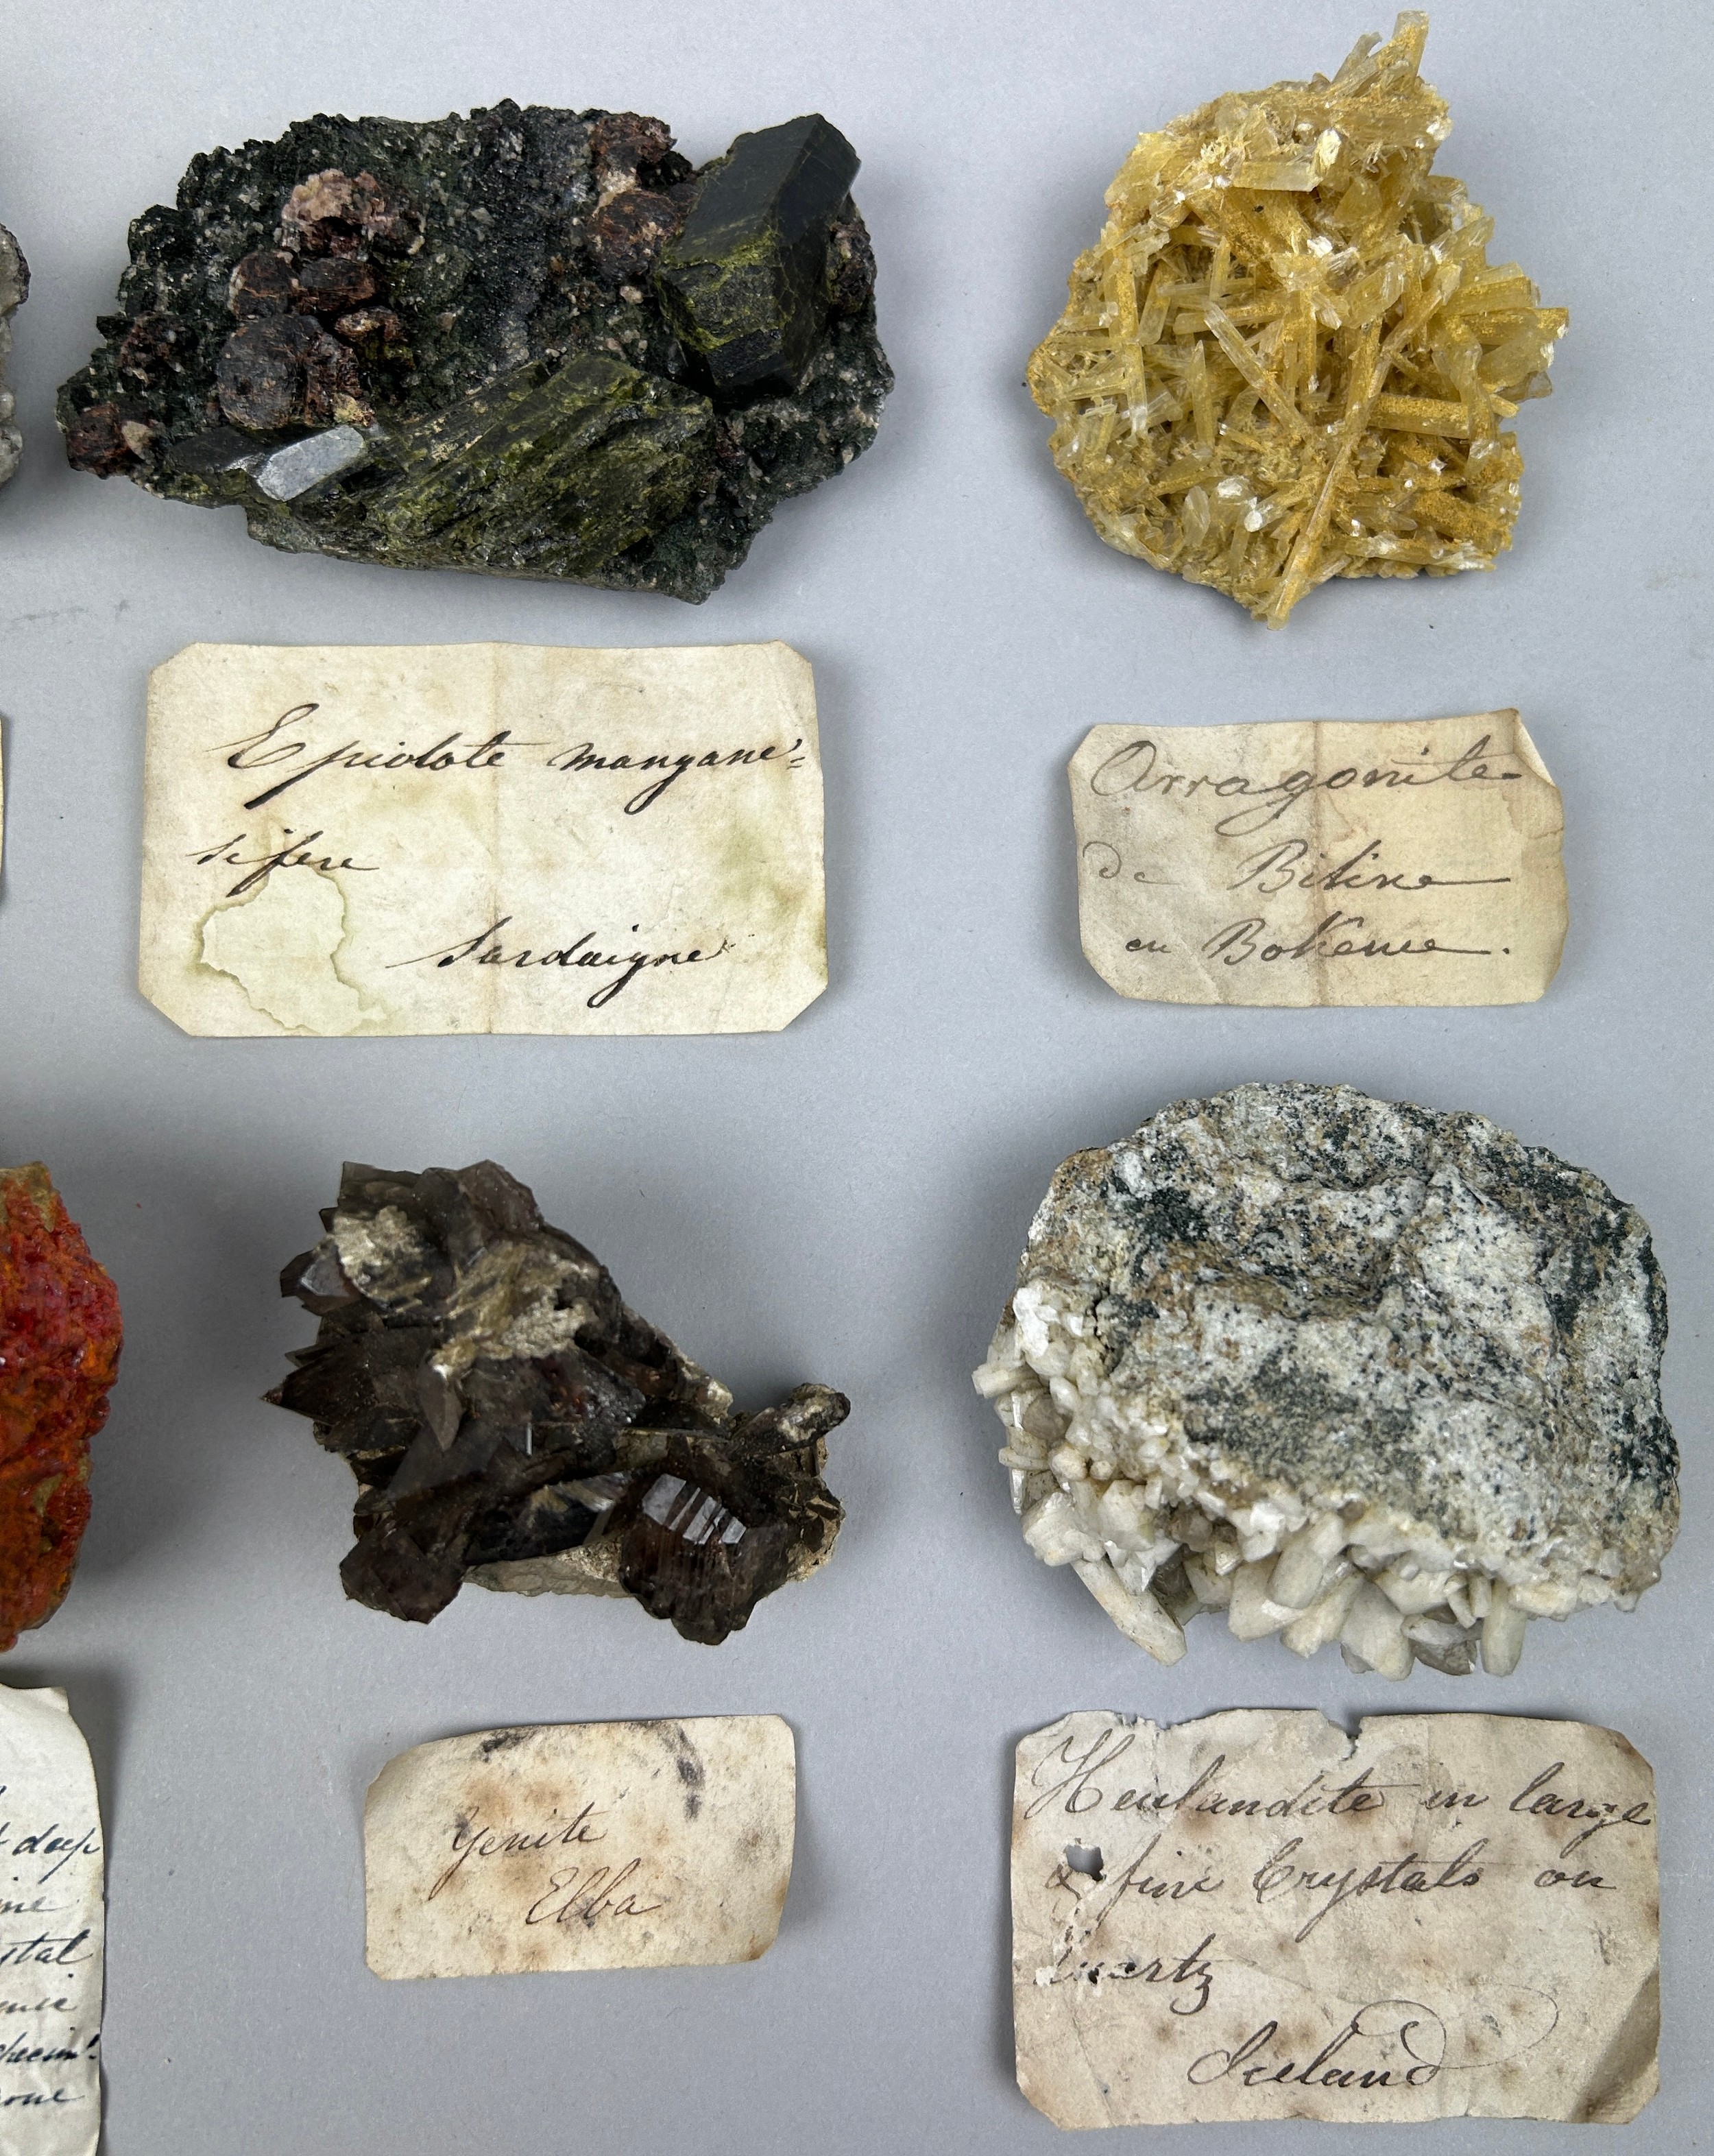 A RARE CABINET COLLECTION OF MINERALS CIRCA 1810-1860, including labels for some very important - Image 6 of 30